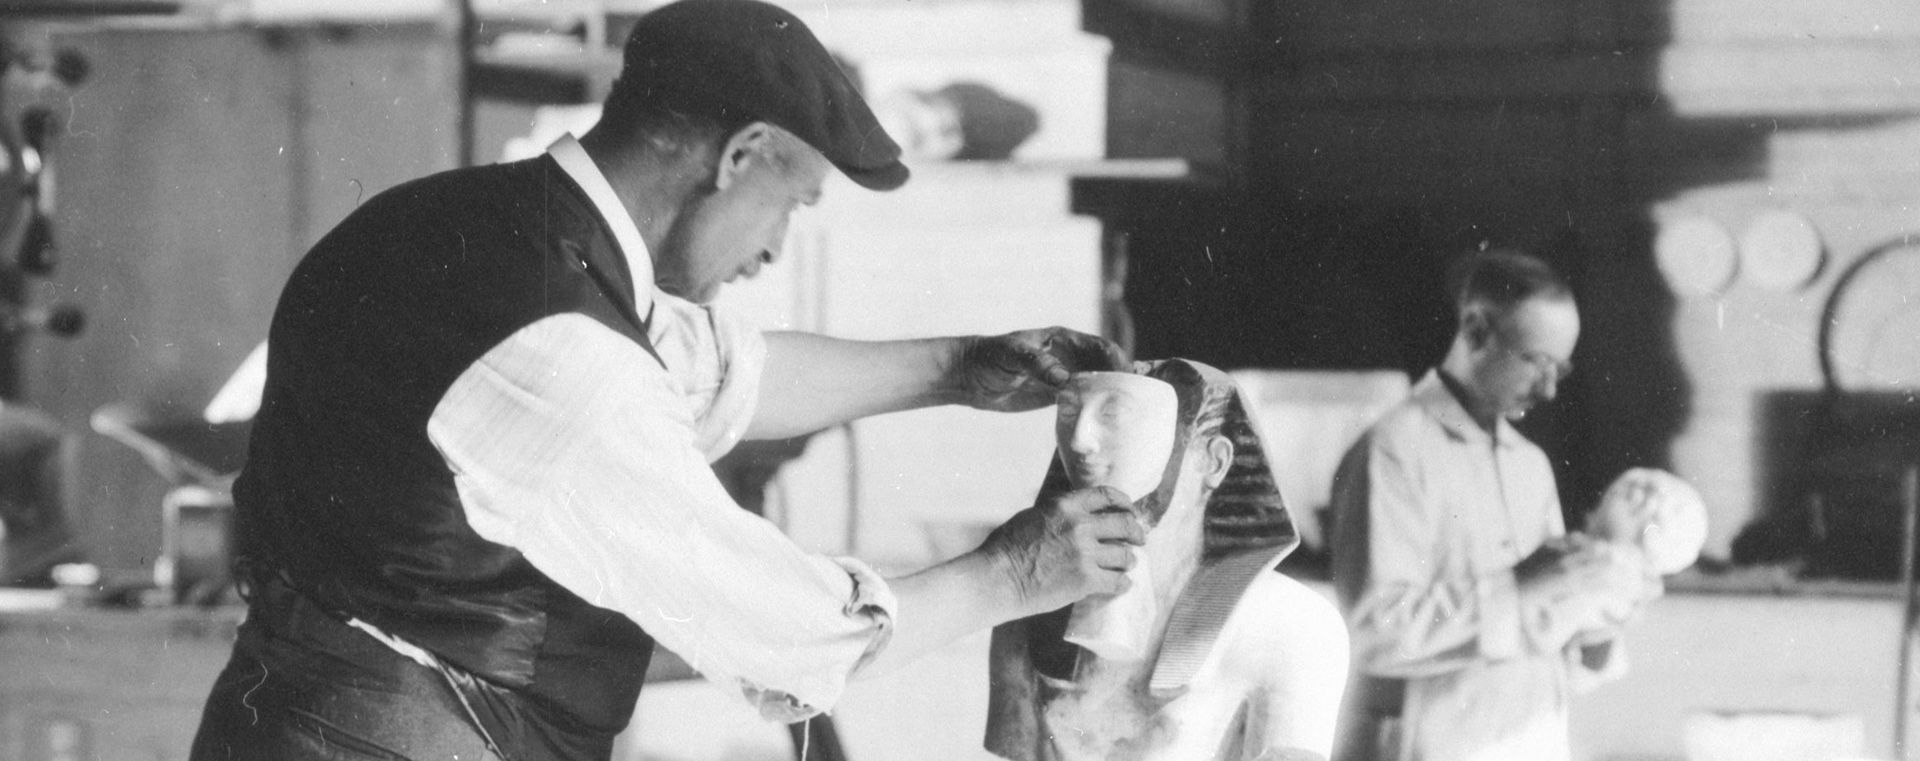 Detail of archival black-and-white photograph showing a man in a white shirt and black vest wearing a black cap fitting the face onto an Egyptian head